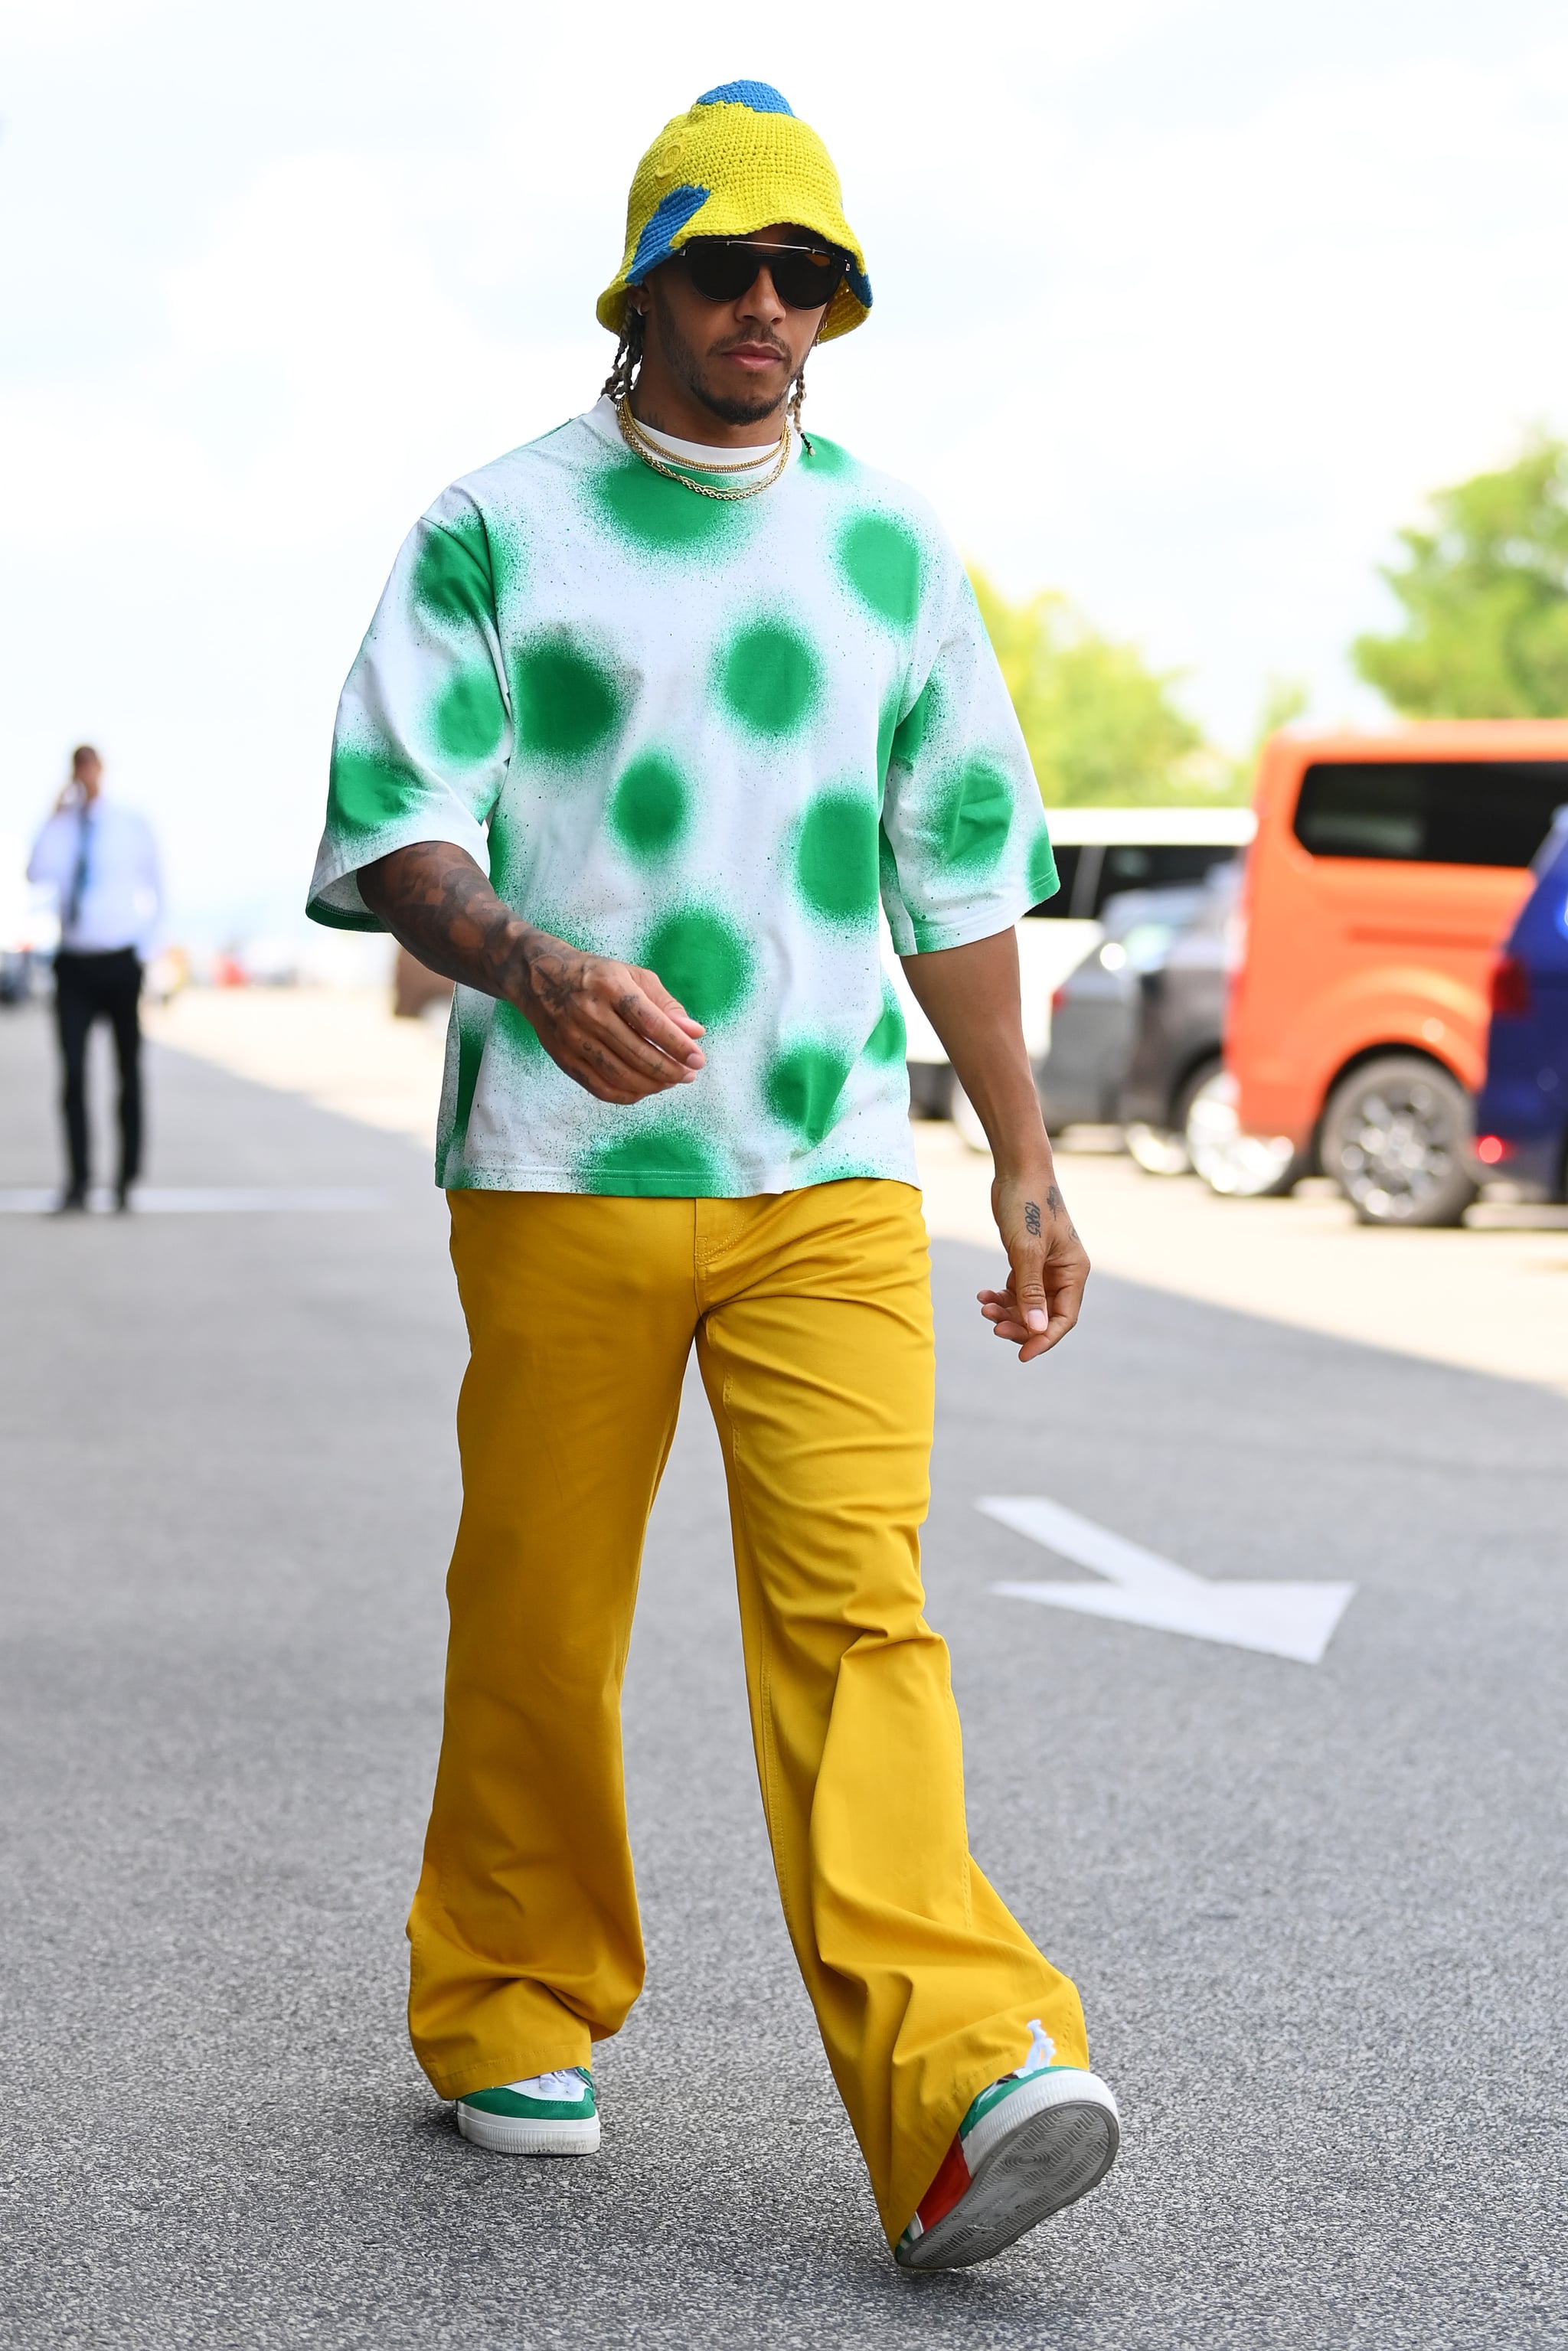 BUDAPEST, HUNGARY - JULY 28: Lewis Hamilton of Great Britain and Mercedes walks in the Paddock during previews ahead of the F1 Grand Prix of Hungary at Hungaroring on July 28, 2022 in Budapest, Hungary. (Photo by Dan Mullan/Getty Images)